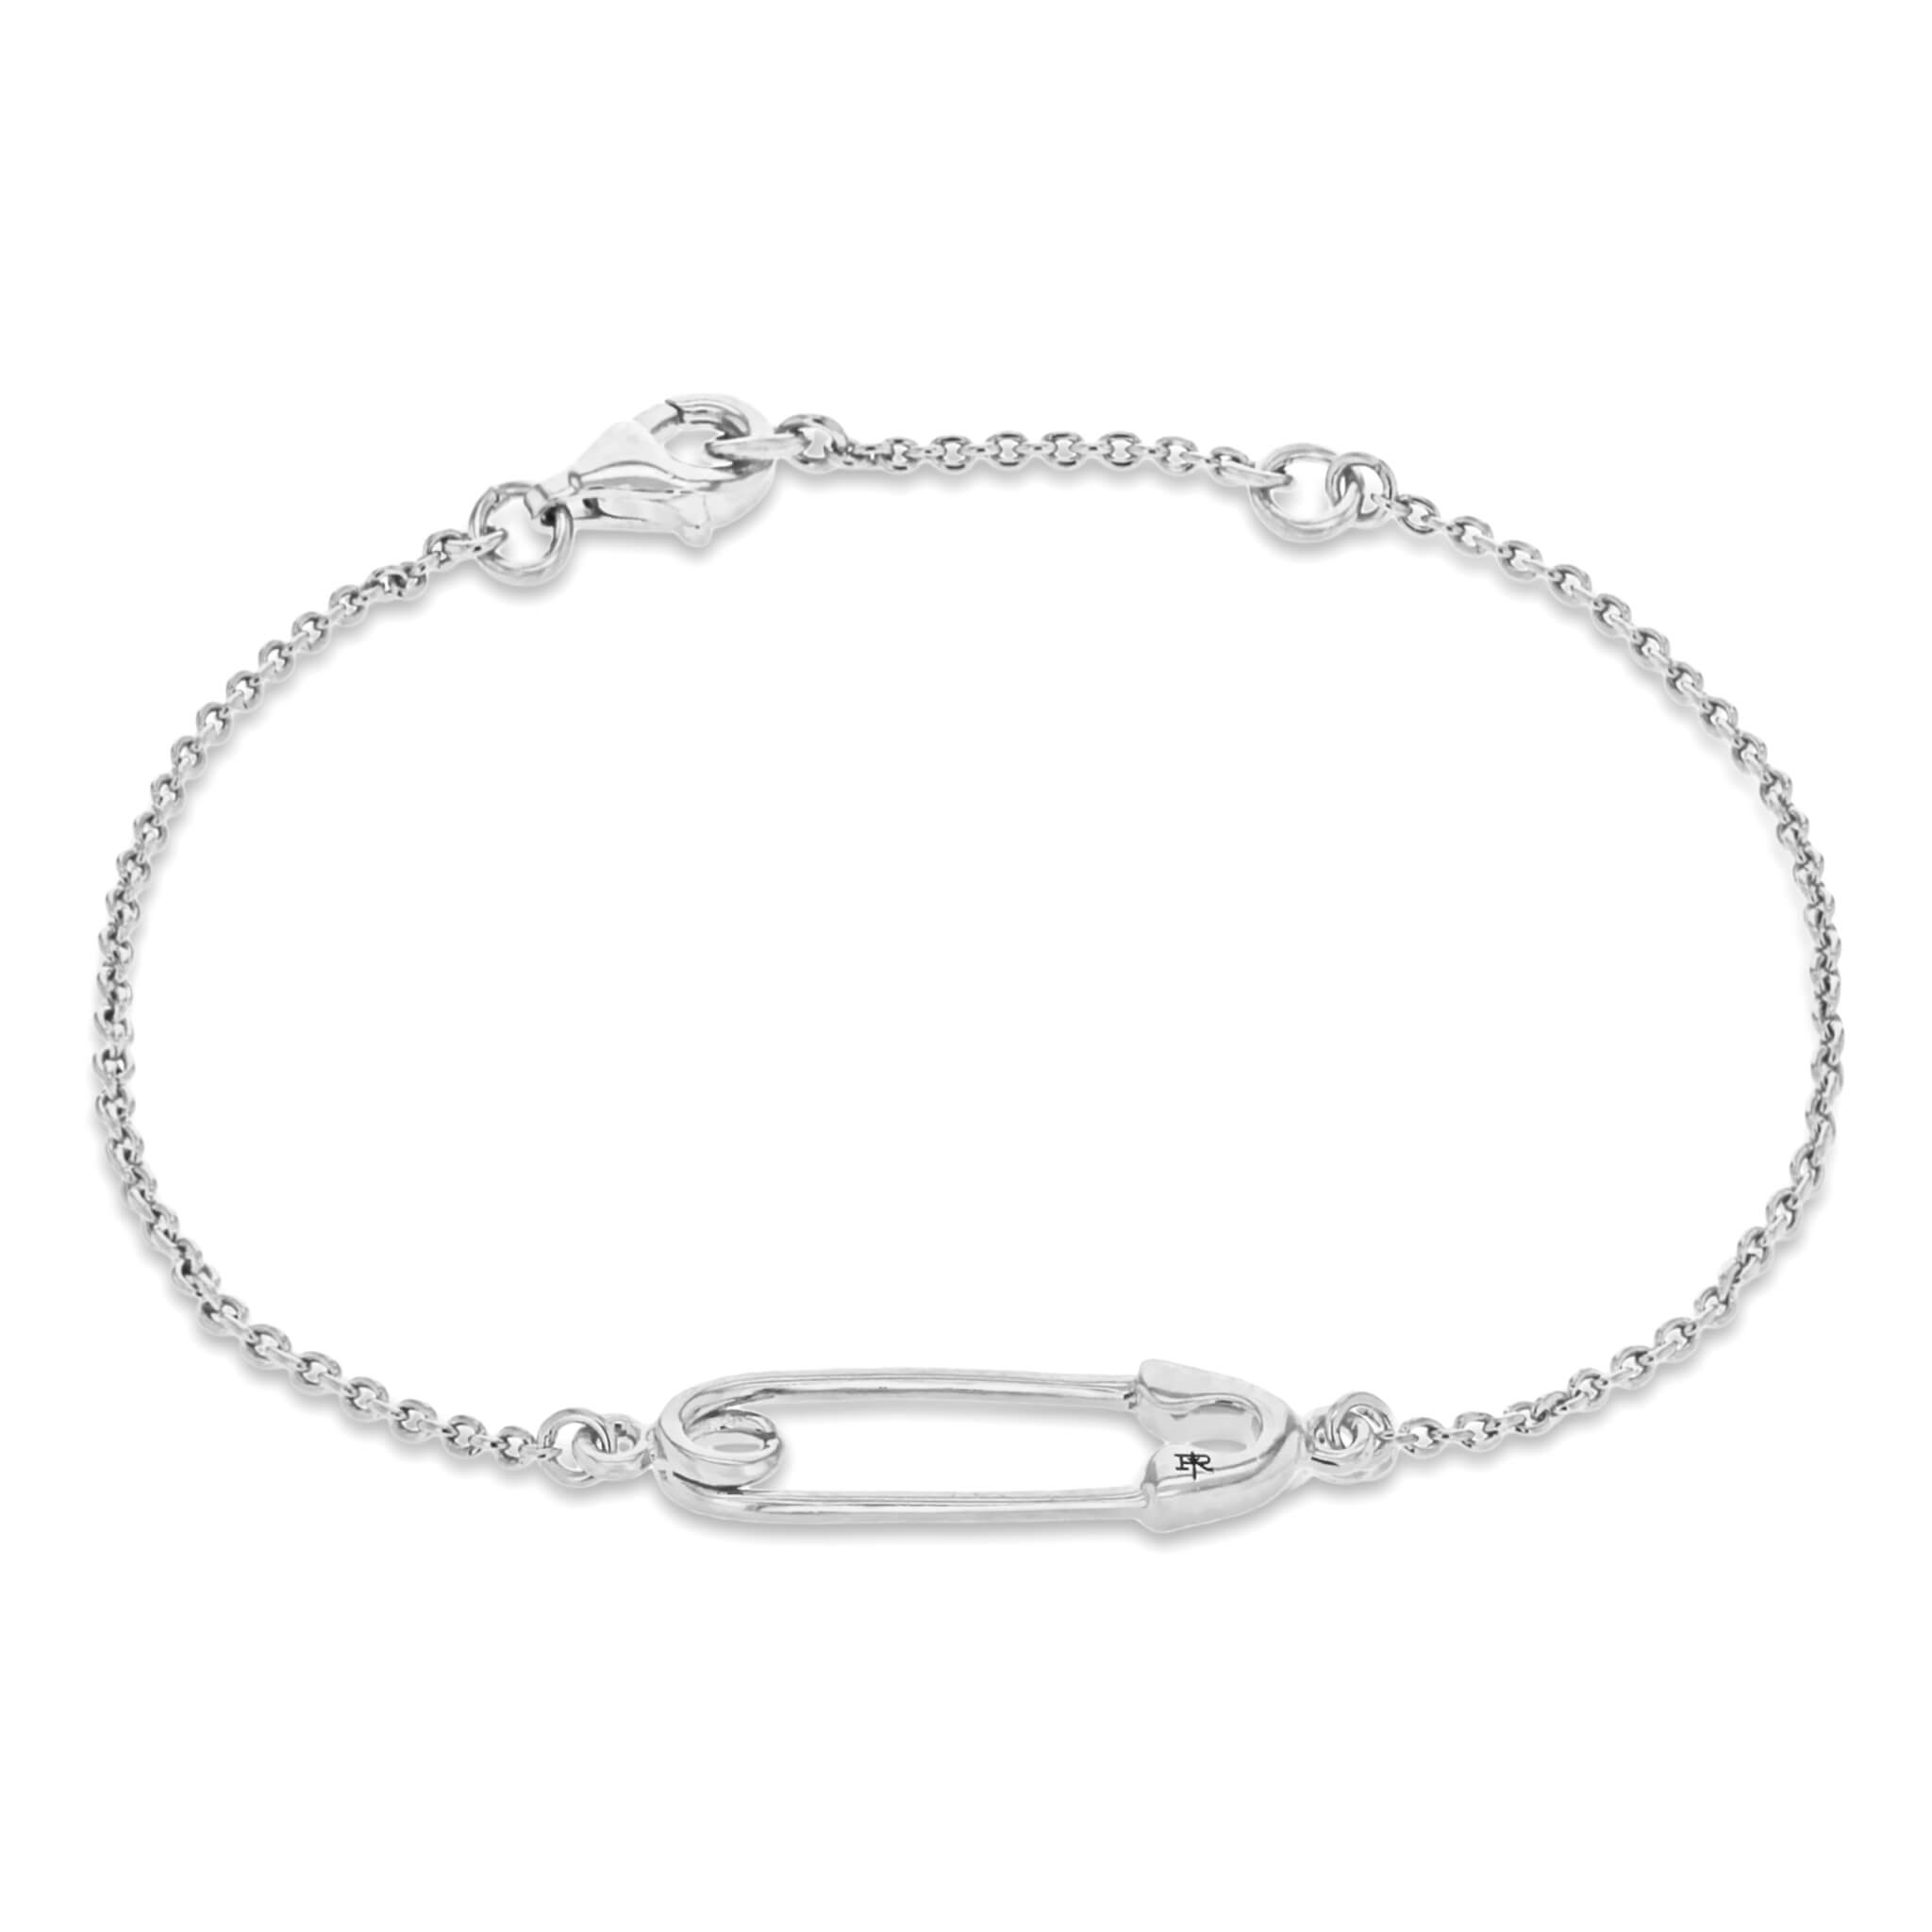 Dew by PB Elegant Silver Safety Pin Inspired Bracelet: Buy Dew by PB  Elegant Silver Safety Pin Inspired Bracelet Online at Best Price in India |  Nykaa